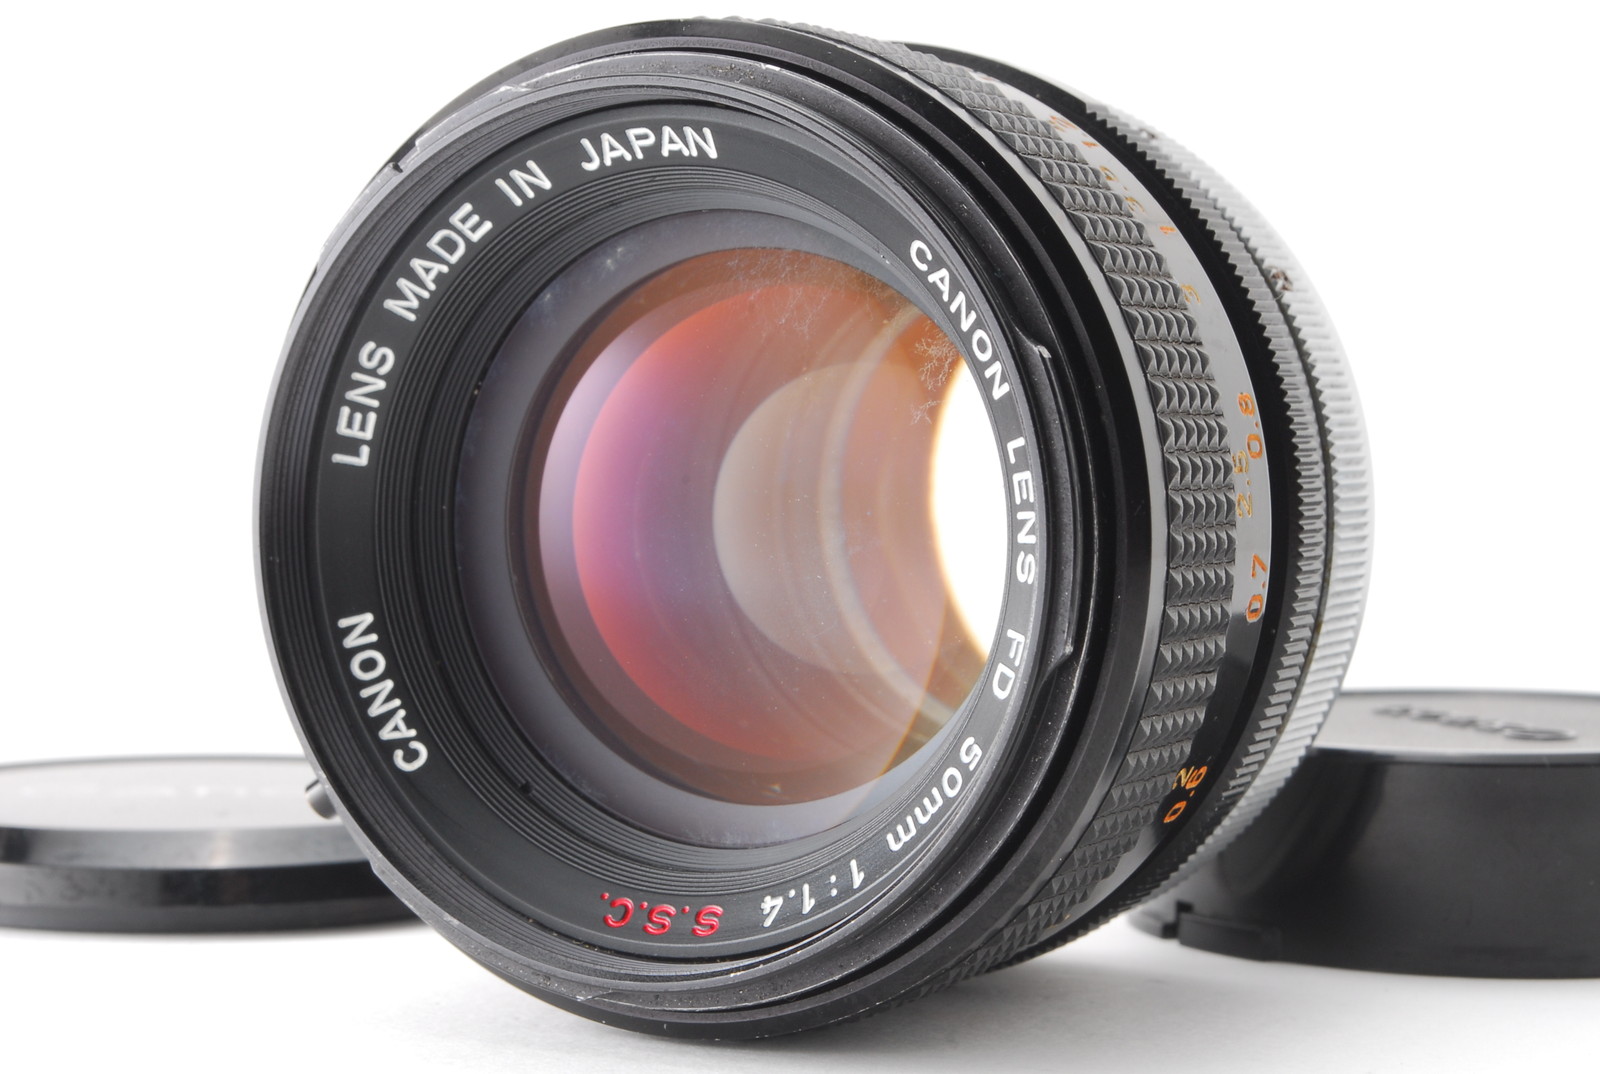 PROMOTION. EXC+++ Canon FD 50mm f/1.4 S.S.C. SSC “O” Mark, Front Cap, Rear Cap from Japan